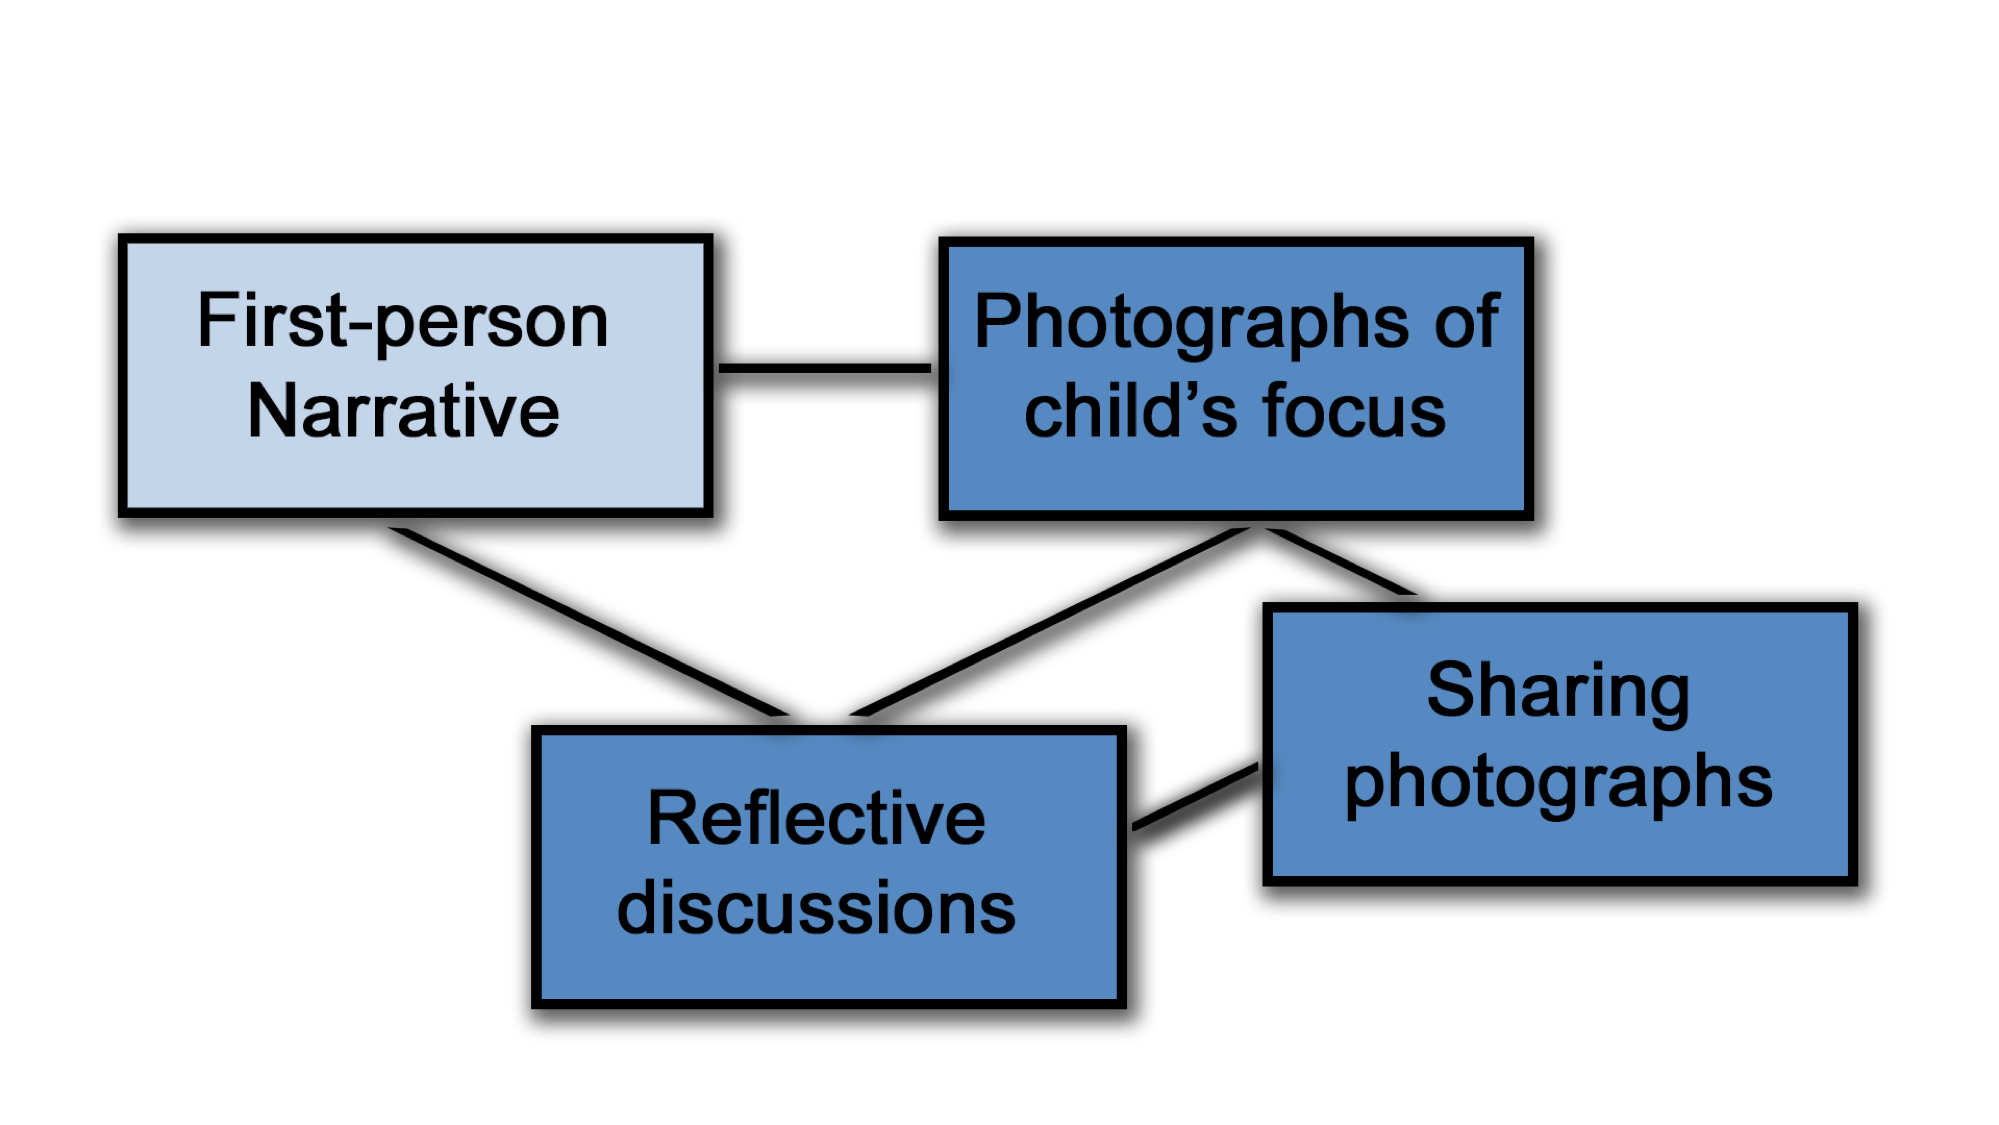 There are four boxes, First person narrative, photographs of child's focus, reflective discussions and sharing photographs. Lines join them to each other. First Person narrative links to reflective discussions and photographs of child's focus, whilst these last two both link to sharing photographs as well.  The first person narrative box is highlighted. 